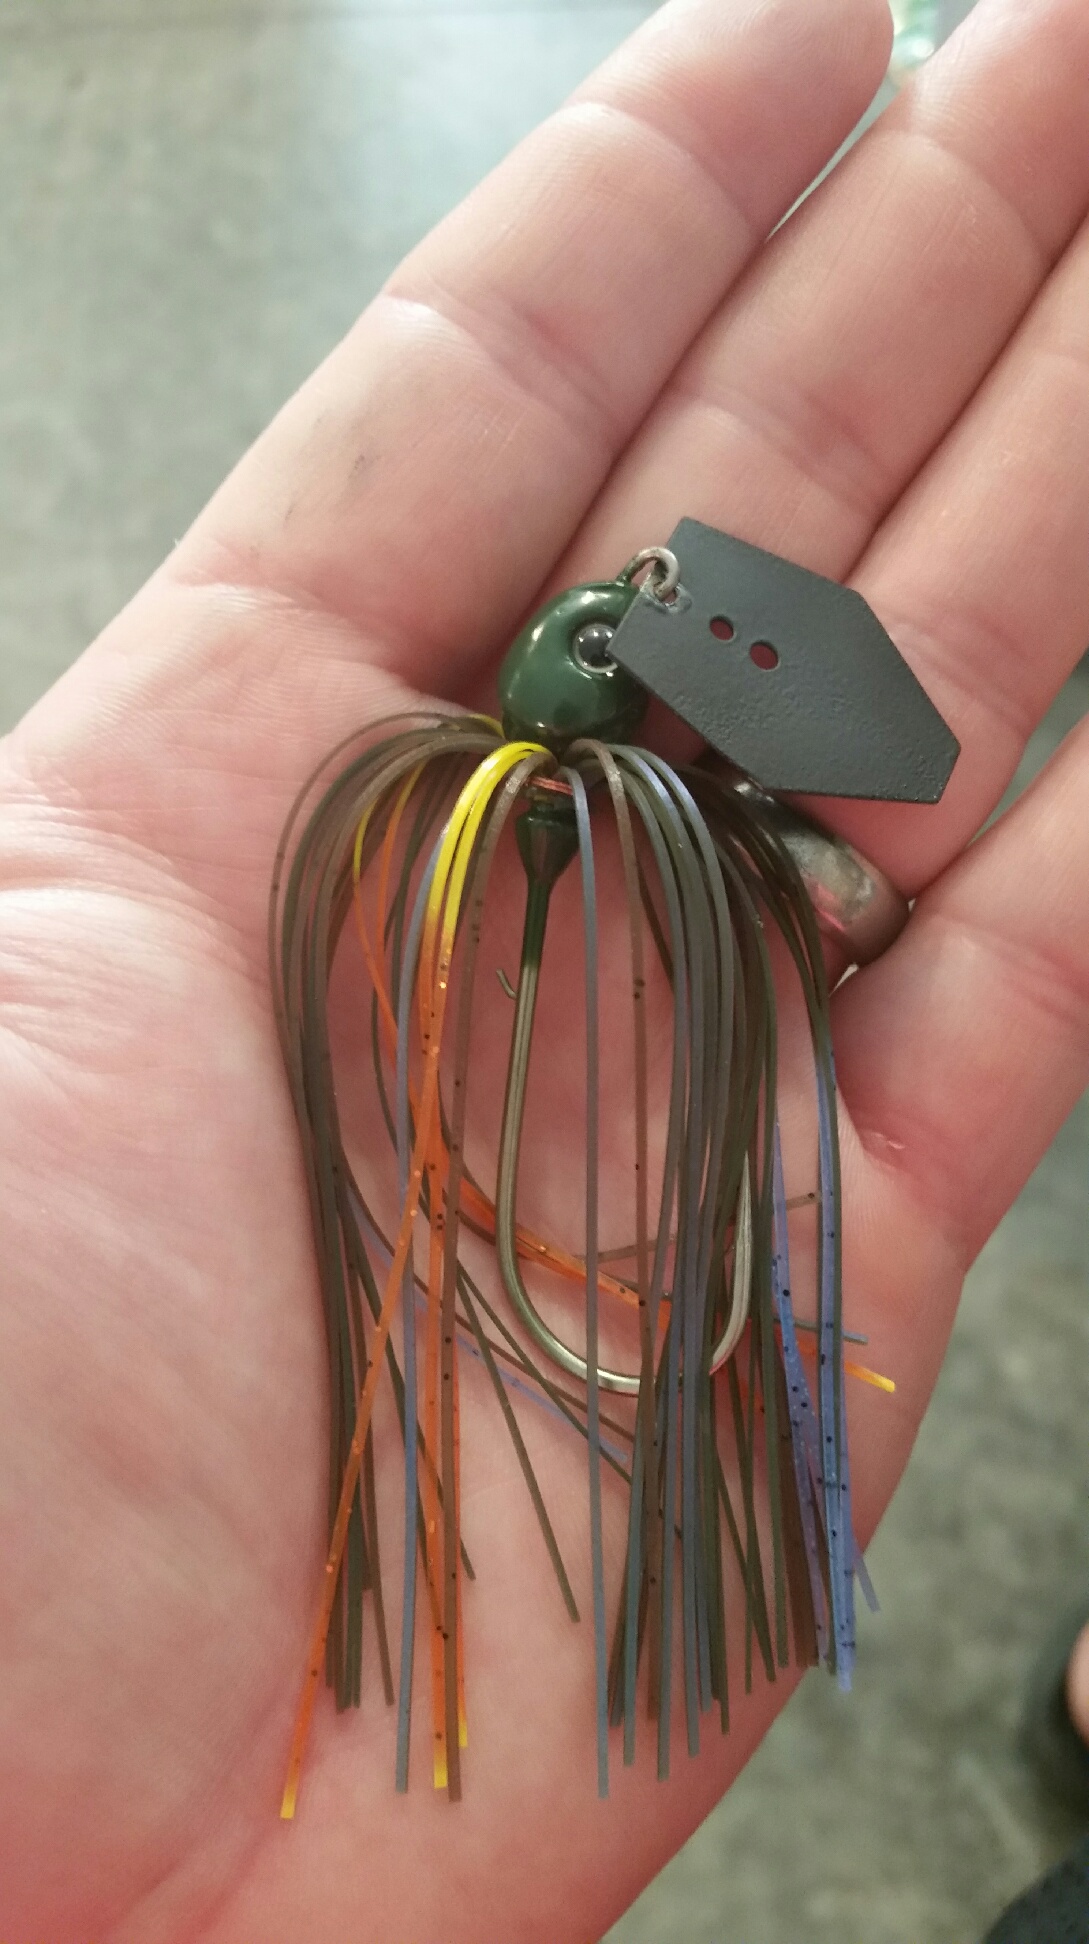 The Best Chatterbait Setup for $300 - Fishing Rods, Reels, Line, and Knots  - Bass Fishing Forums